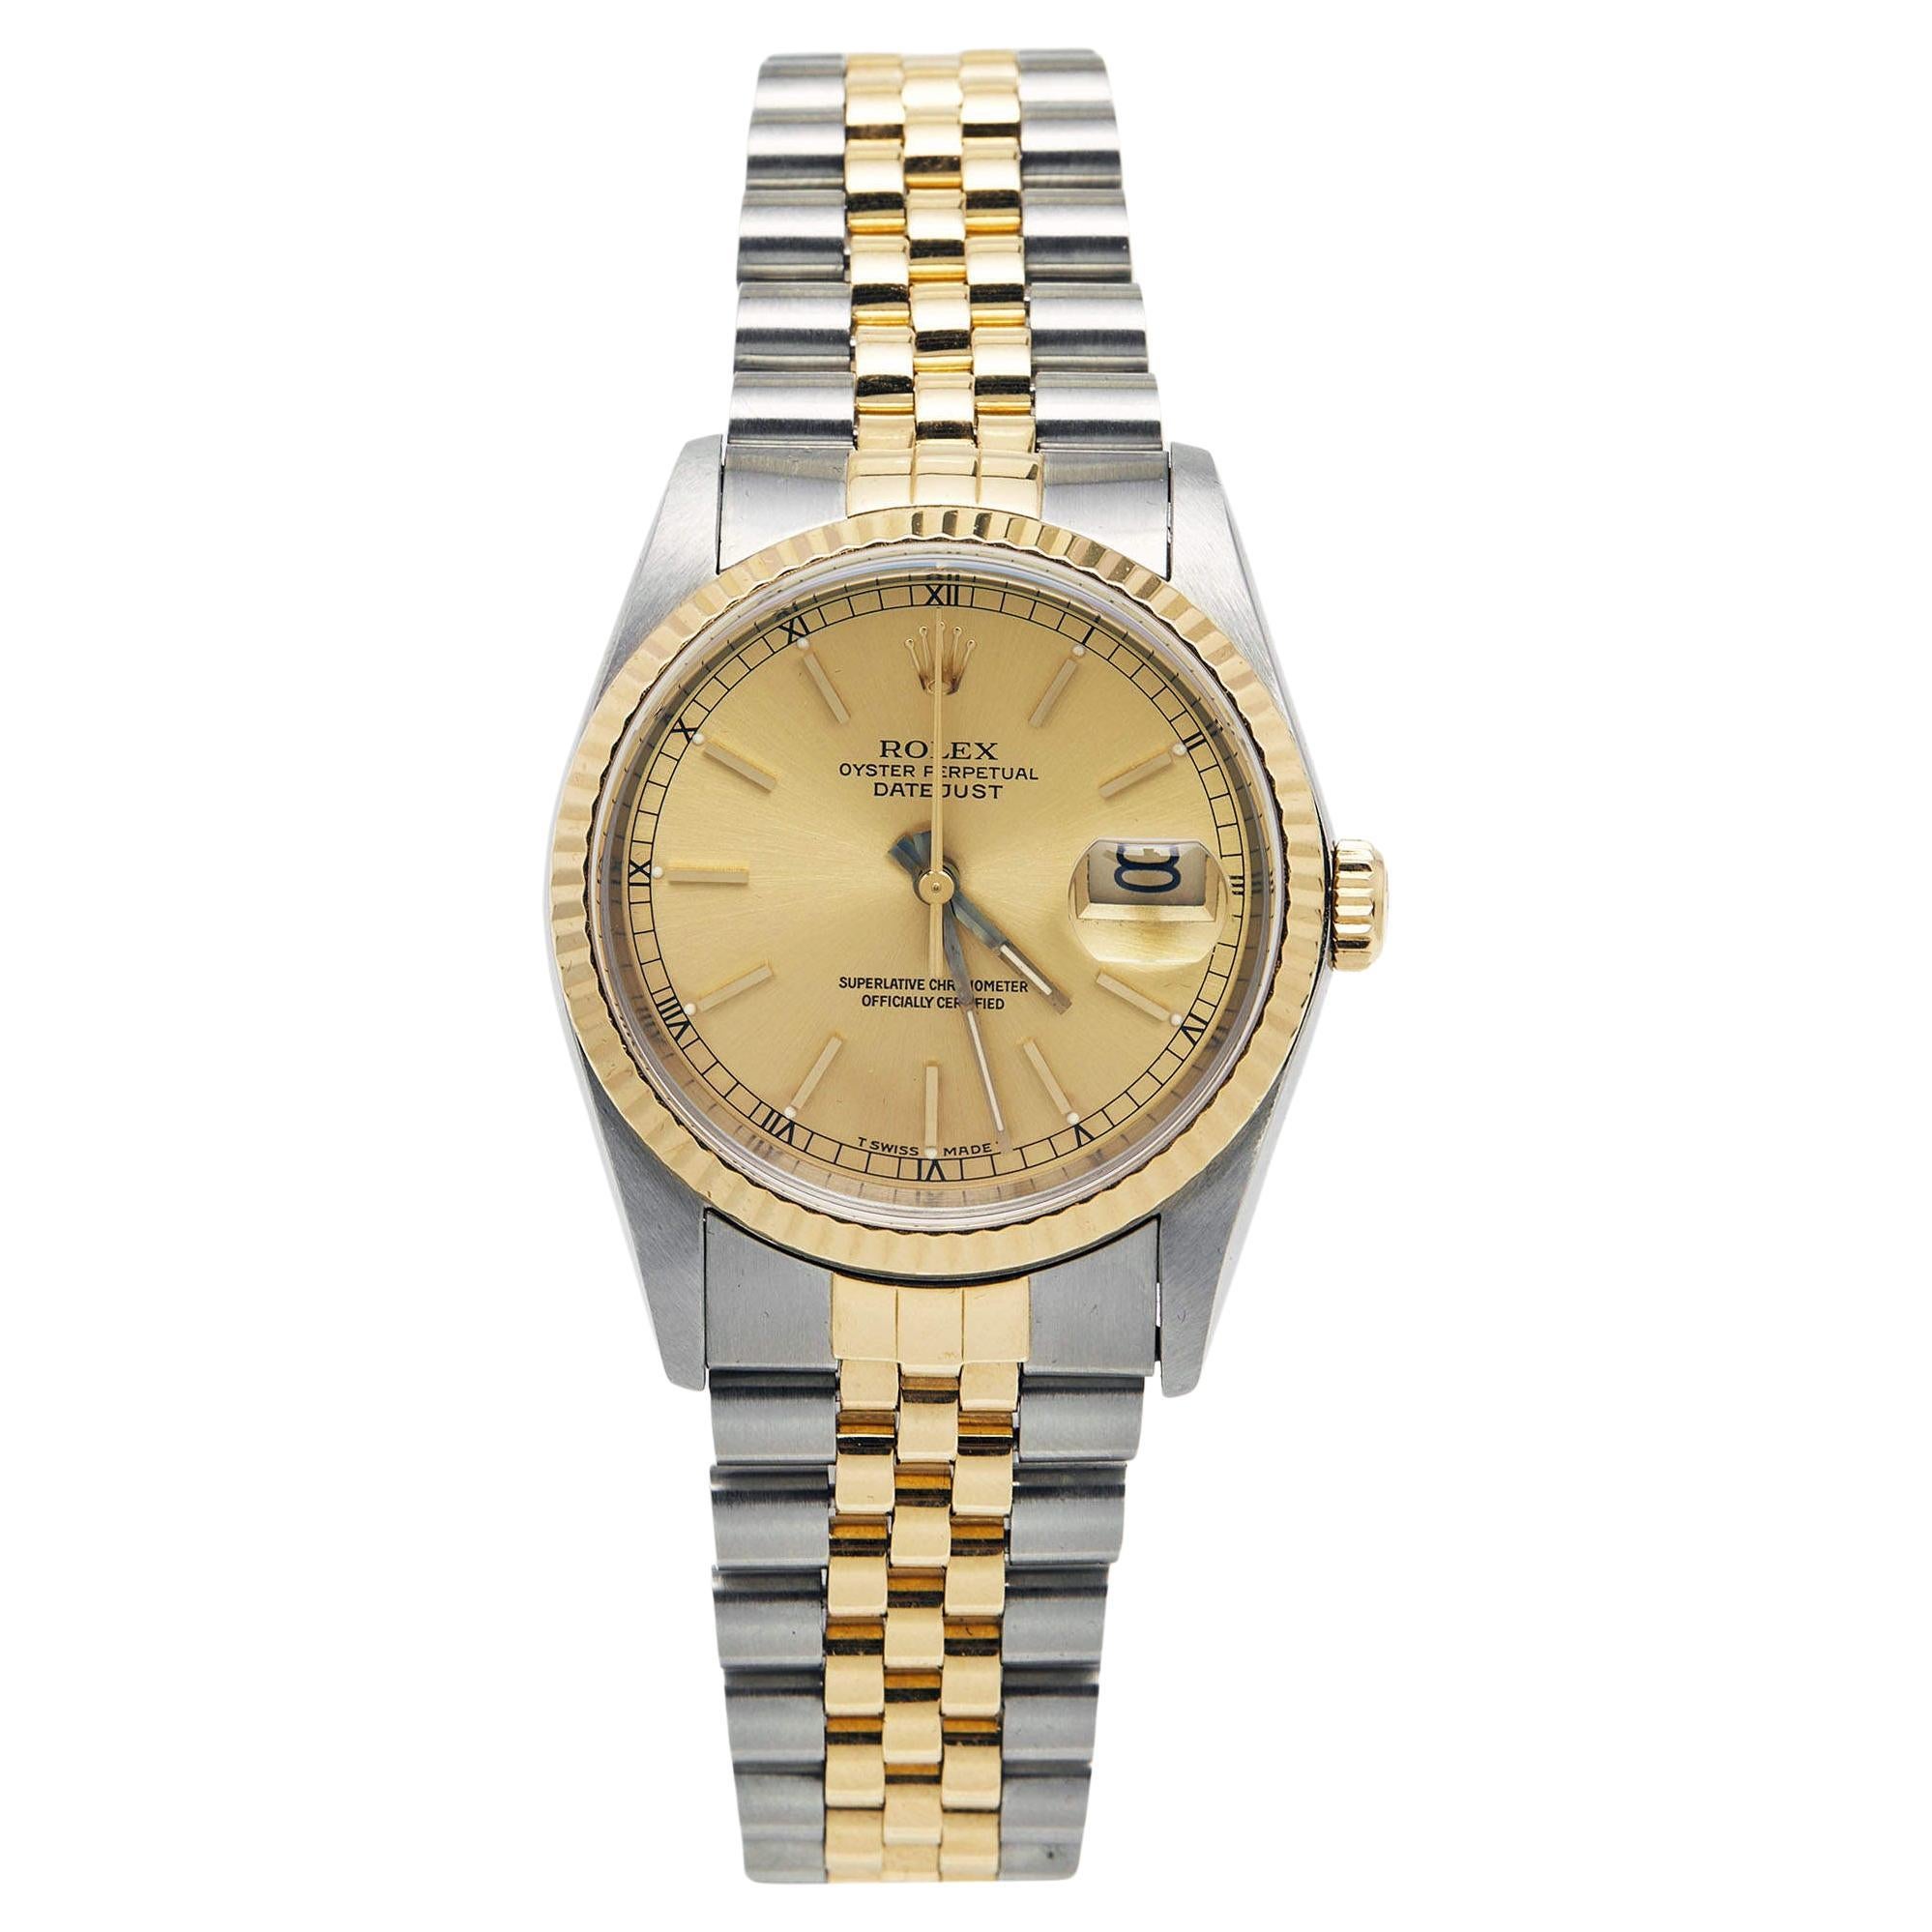 Rolex Champagne 18k Yellow Gold And Stainless Steel Datejust 16233 Men's watch